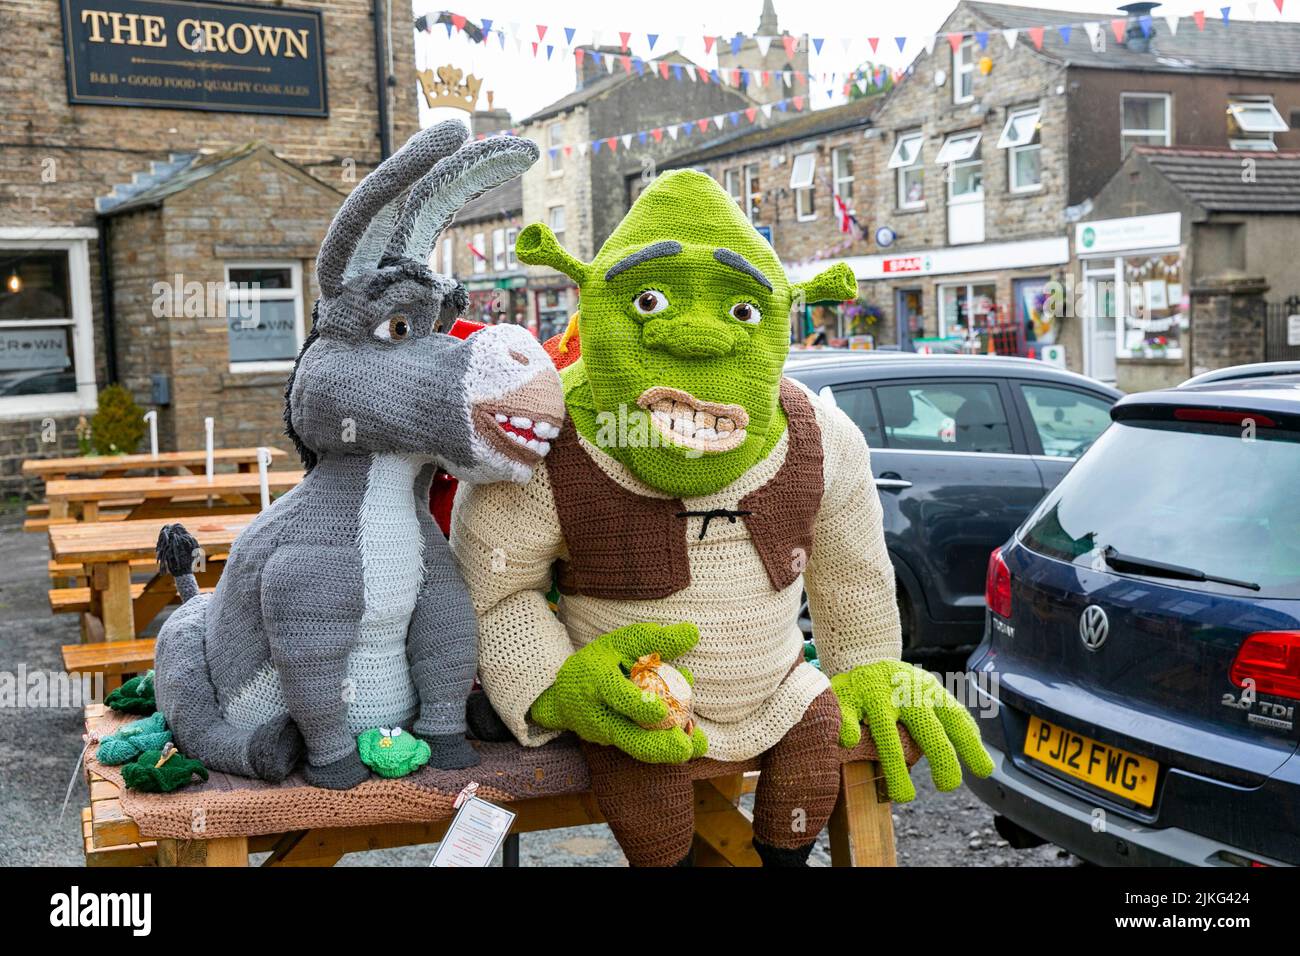 Hawes village in the Yorkshire Dales, life size knitted Shrek characters displayed for charitable fundraising outside the Board Inn,Yorkshire,England Stock Photo